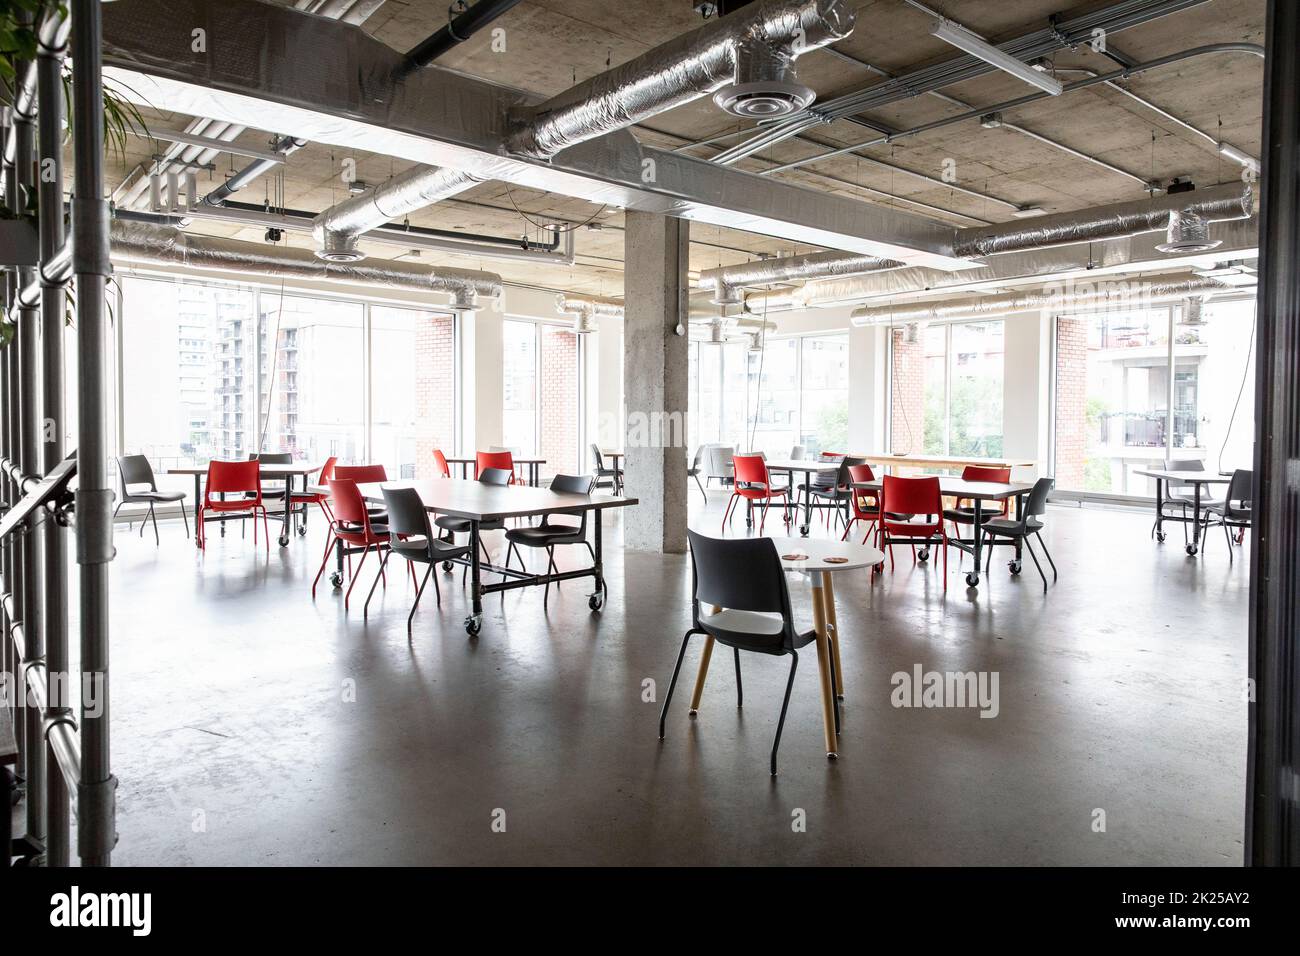 Coworking space with space arranged for social distancing Stock Photo